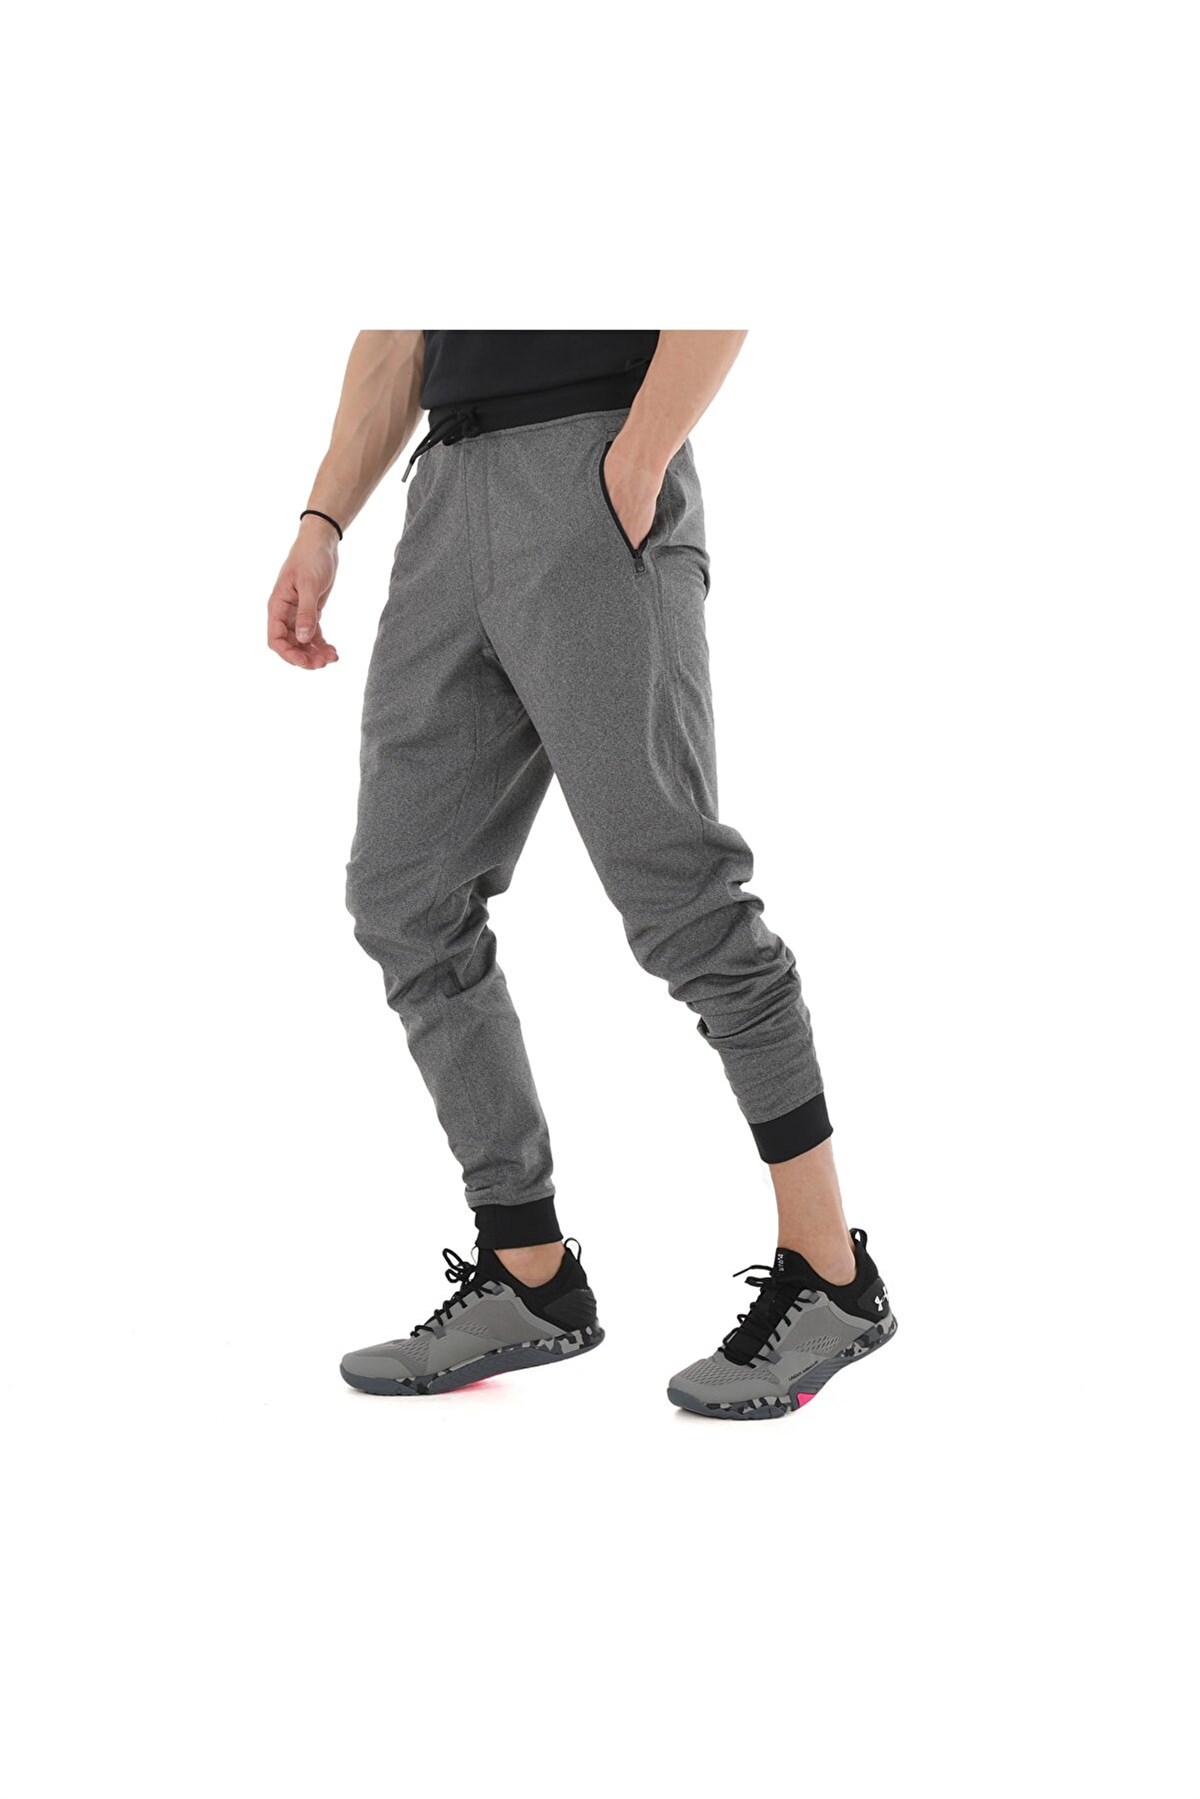 UNDER ARMOUR Mens SPORTSTYLE TRICOT JOGGER 1290261